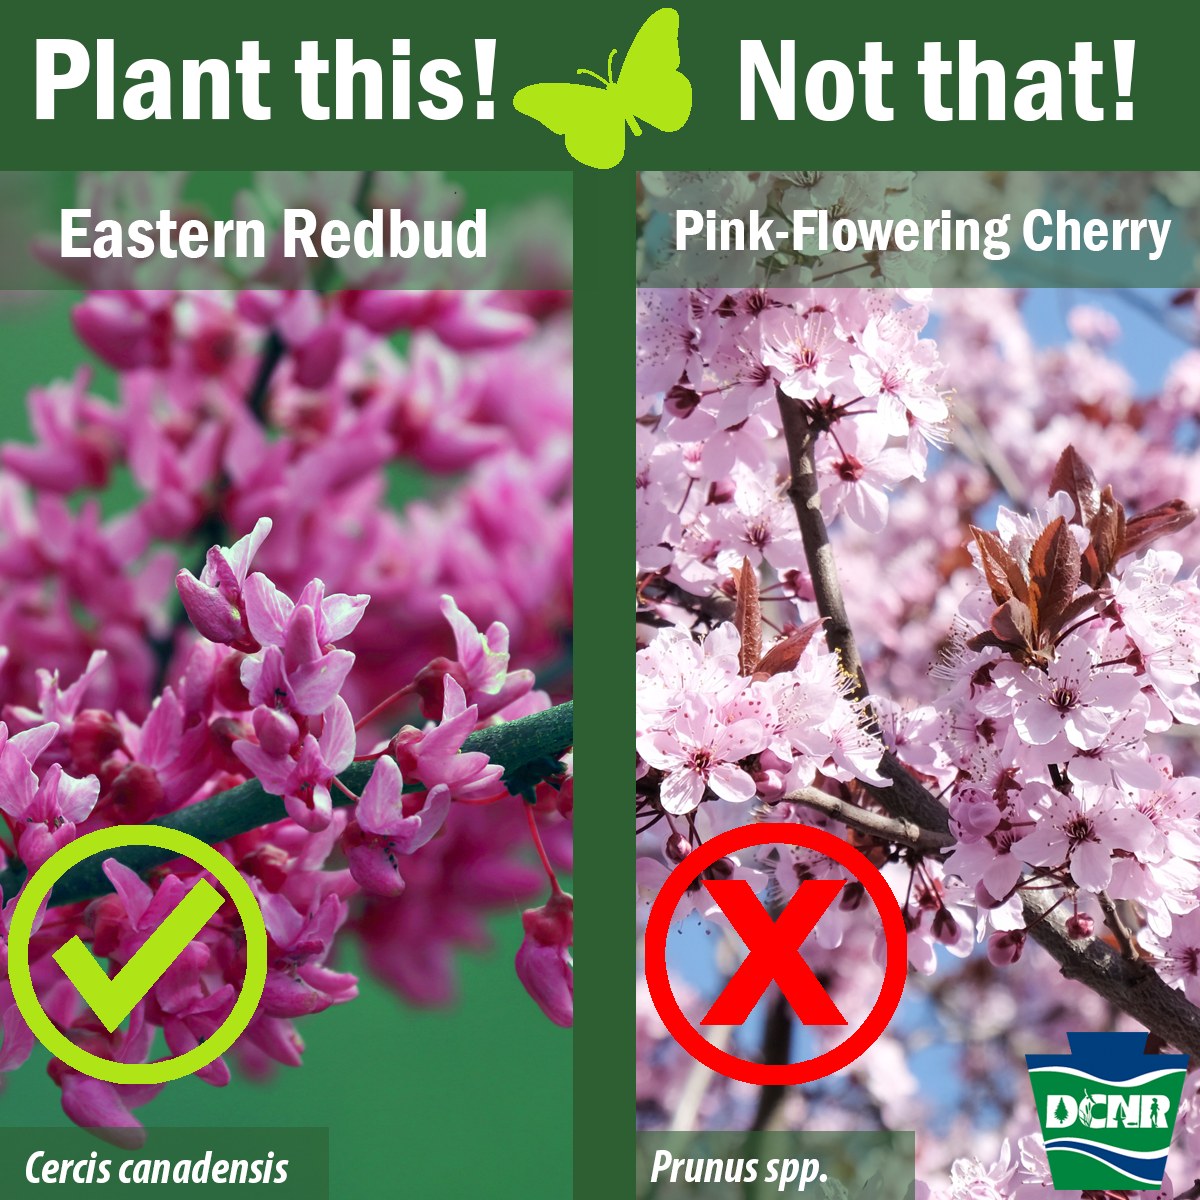 Flowering cherry trees are popular for their pink blossoms. These hybrid ornamental trees are not native and aren’t well adapted to their surroundings. A native alternative is #EasternRedbud which blooms in spring with purple flowers. More on natives ➡️ bit.ly/2JZs99I.